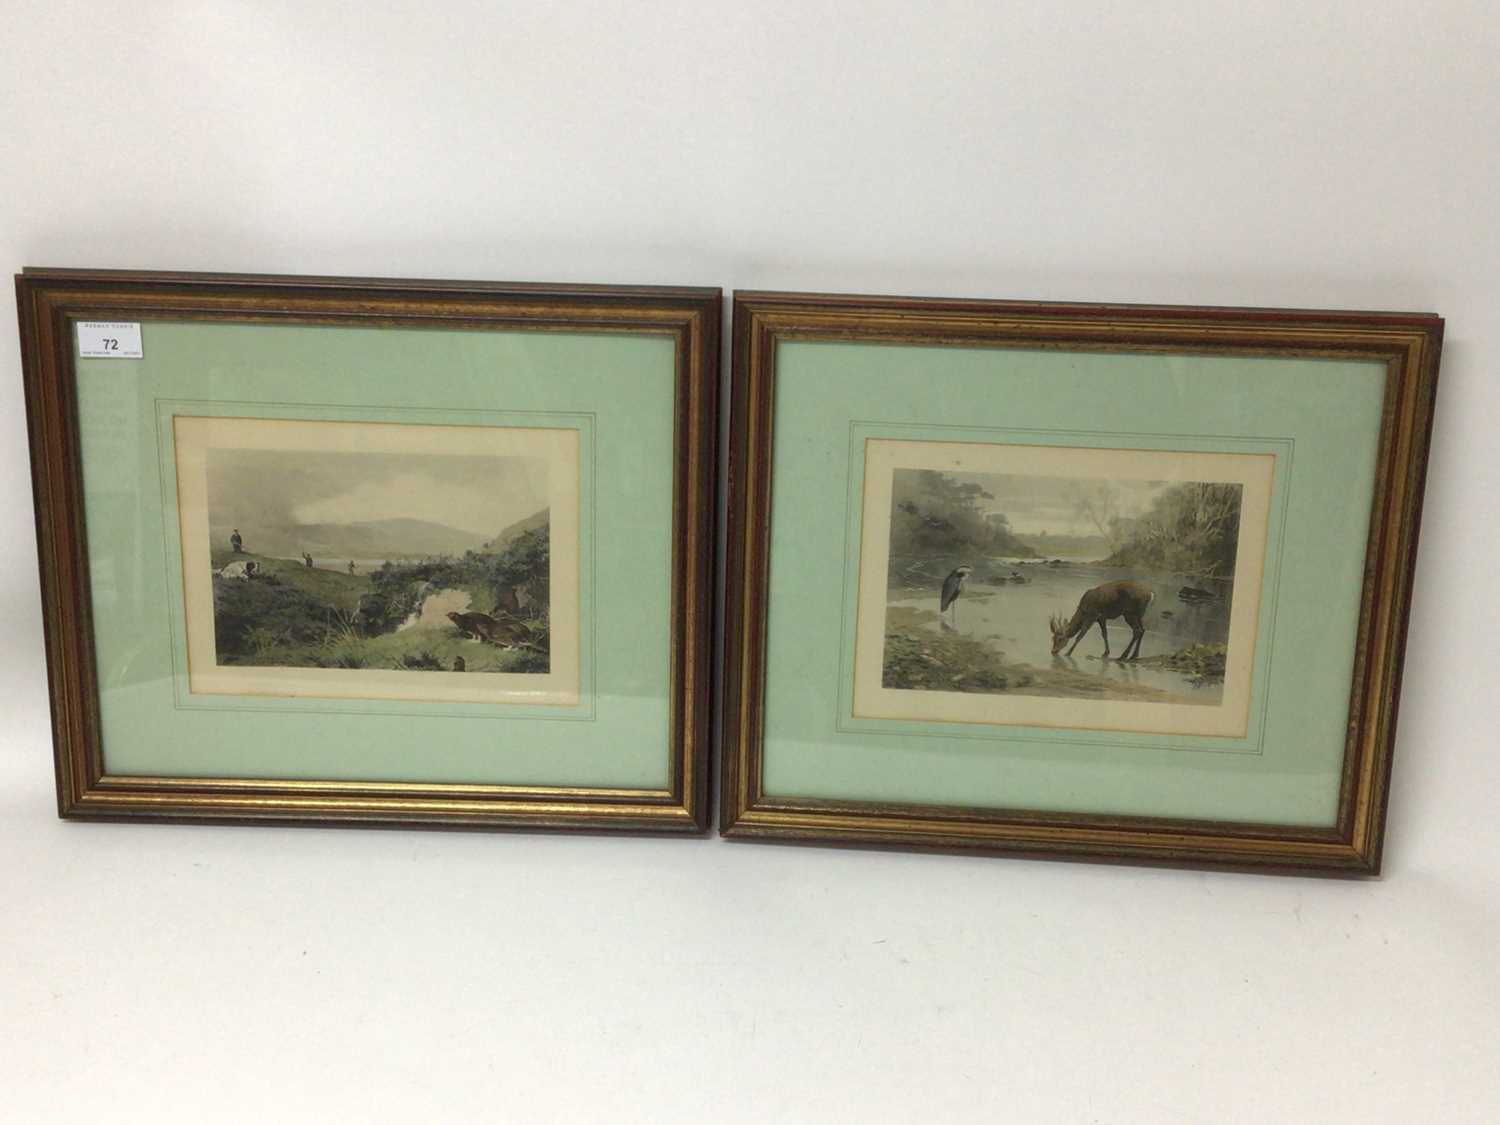 Lot 72 - Archibald Thorburn pair of coloured prints - Grouse and Deer with a Heron, 18cm x 25cm, in glazed gilt frames